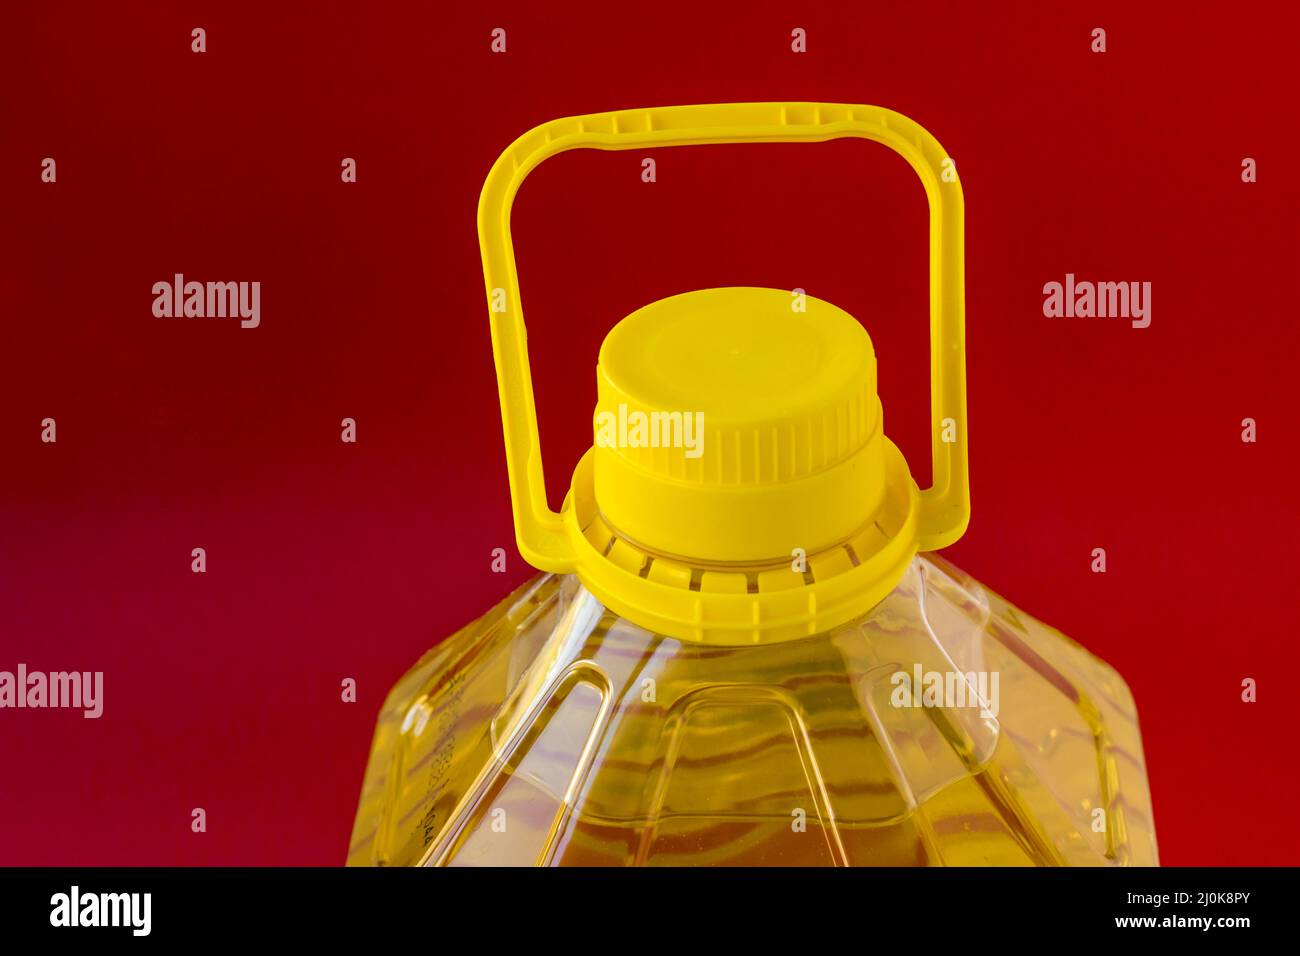 Five liter sunflower oil in a plastic bottle on red background,close-up taken Stock Photo